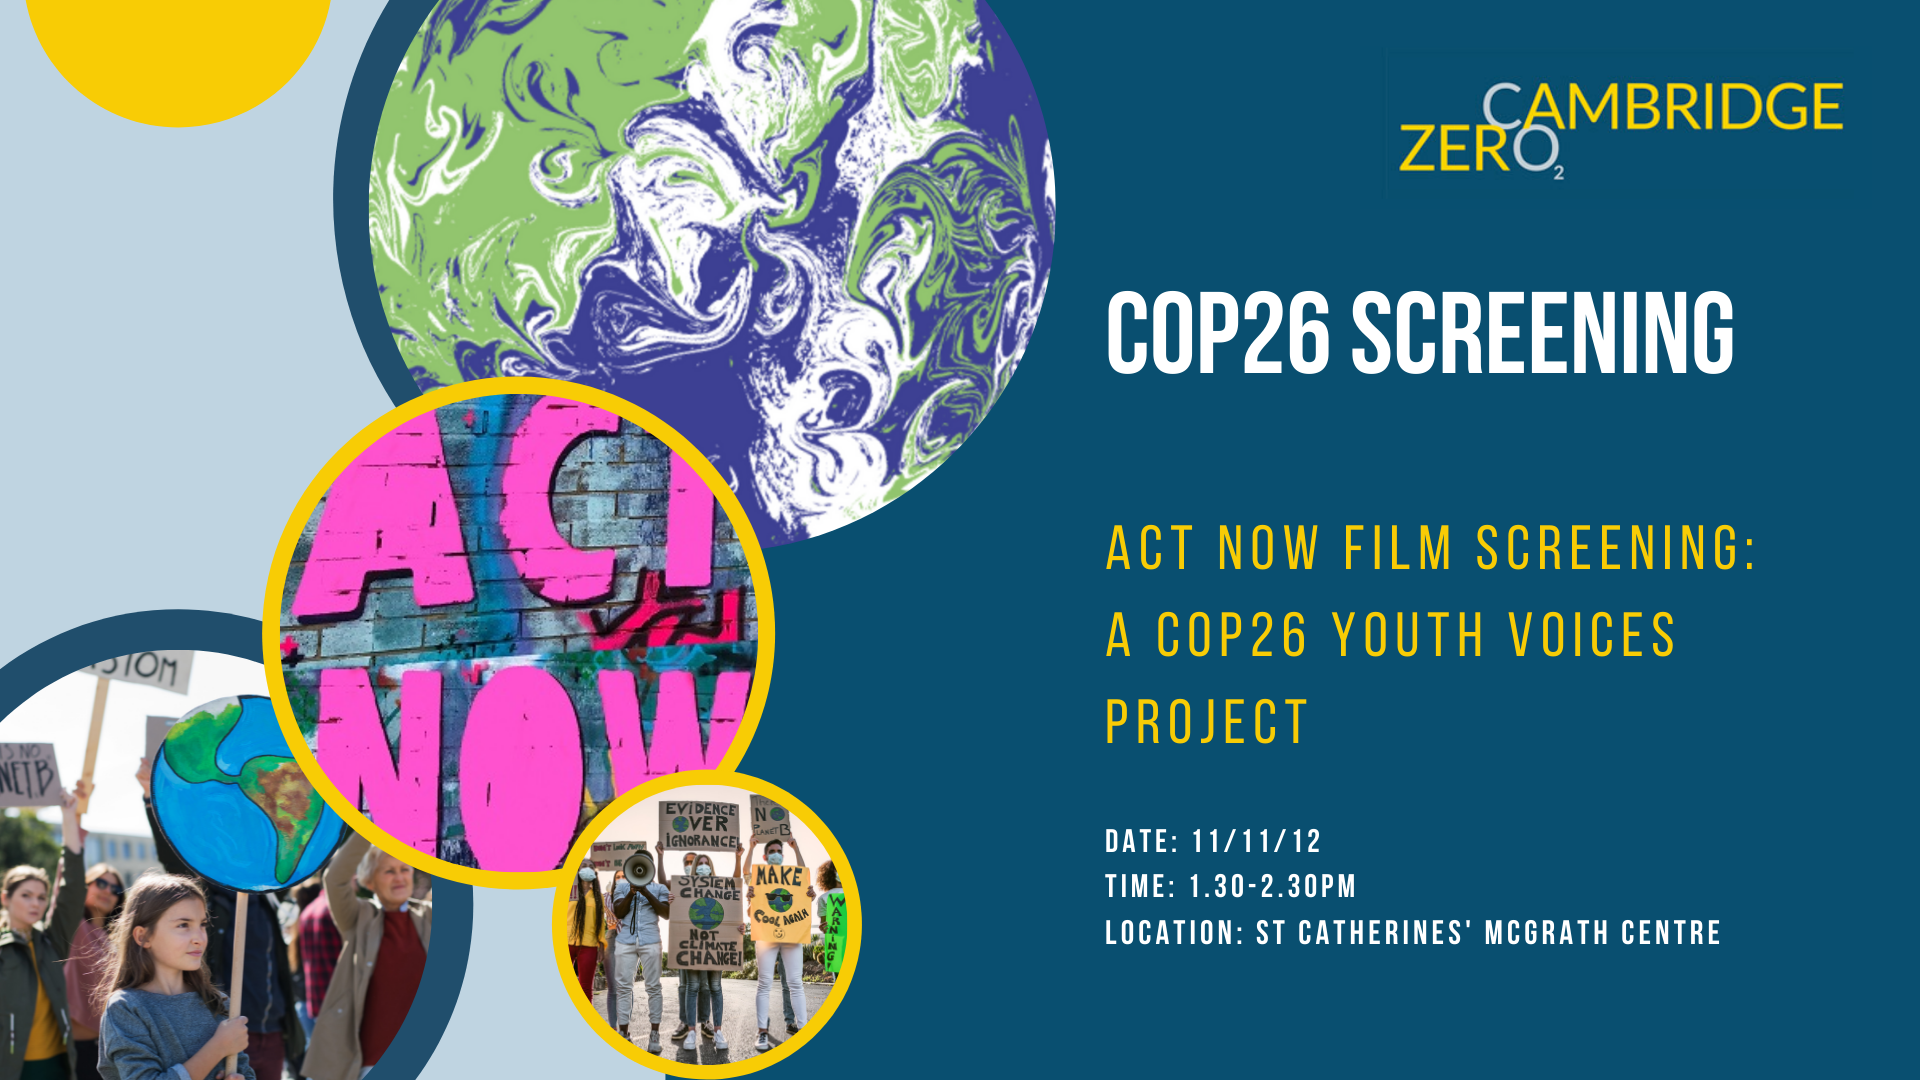 COP26 Screening: Act Now Film Screening: A cop26 youth voices project. 11th November, 1.30-2.30p, St Catherine's McGrath Centre. Images of the film and protests